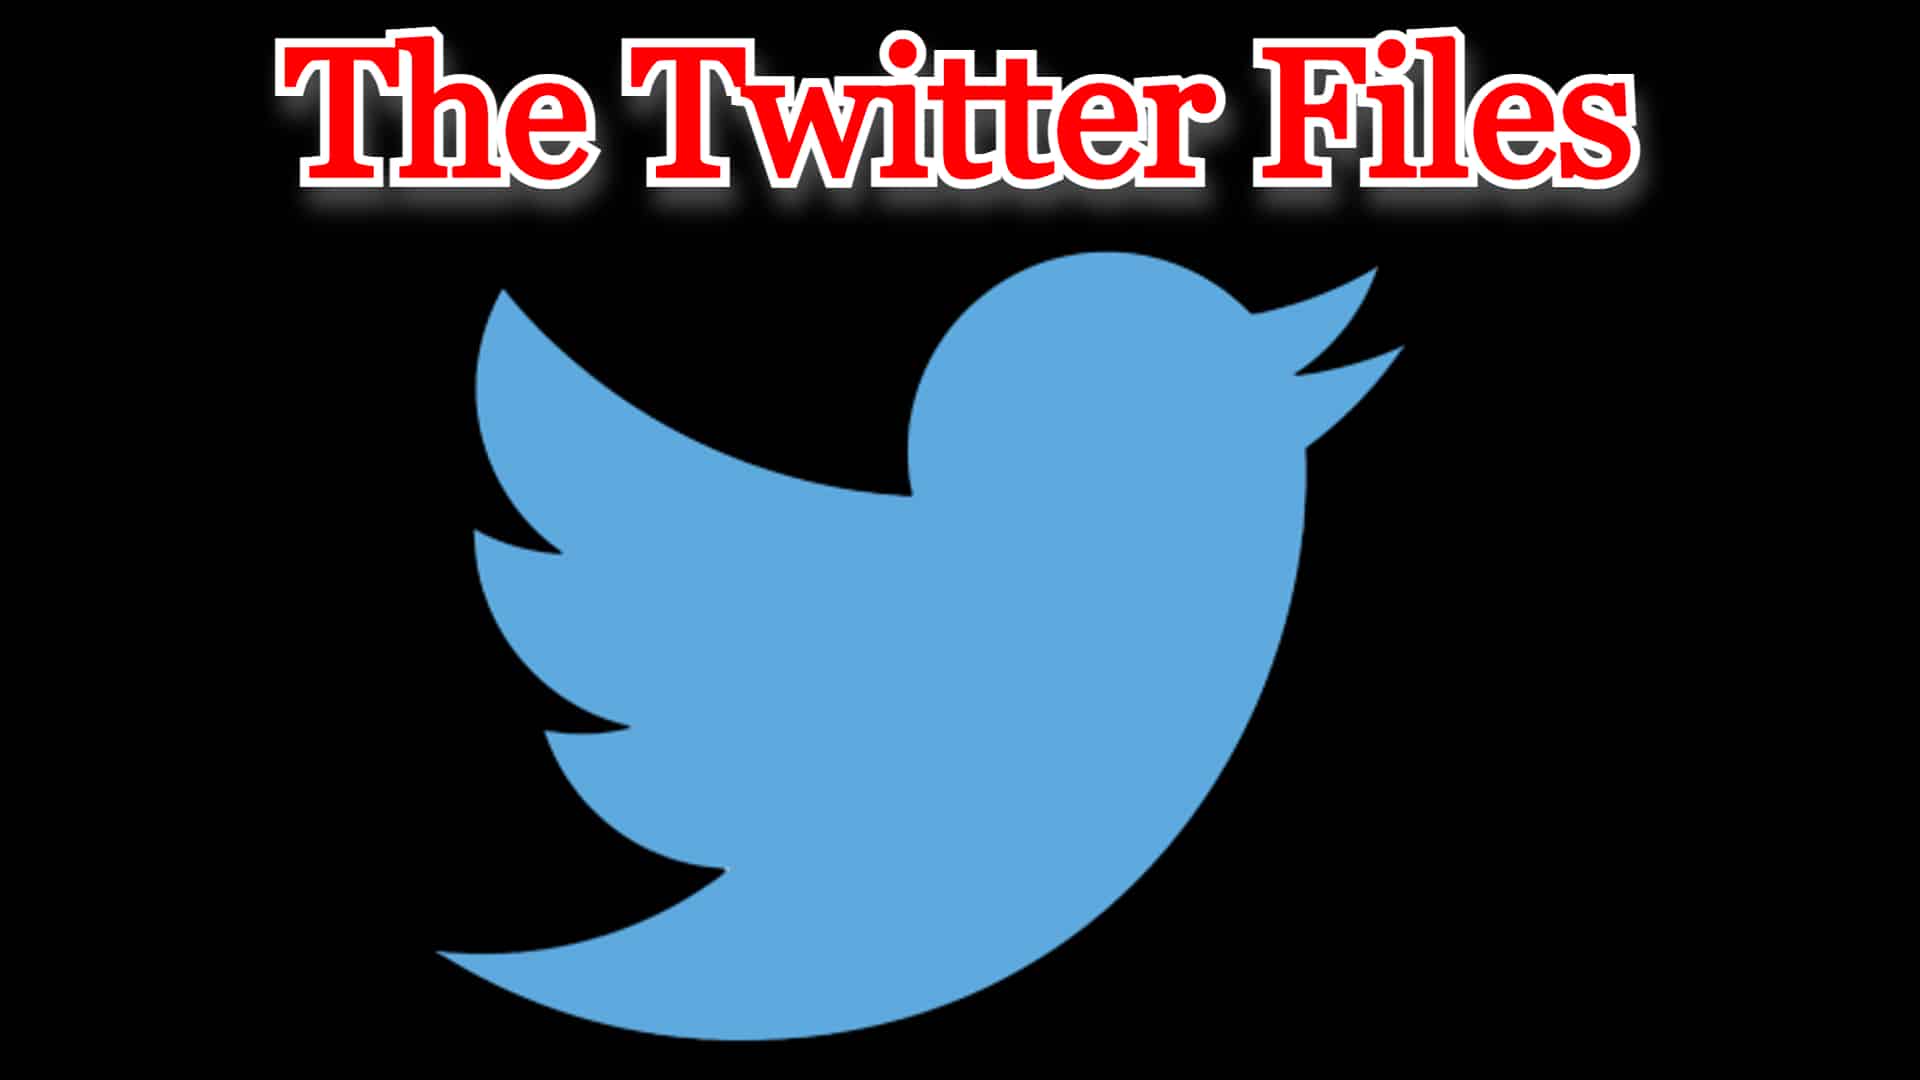 COI #364: The Twitter Files